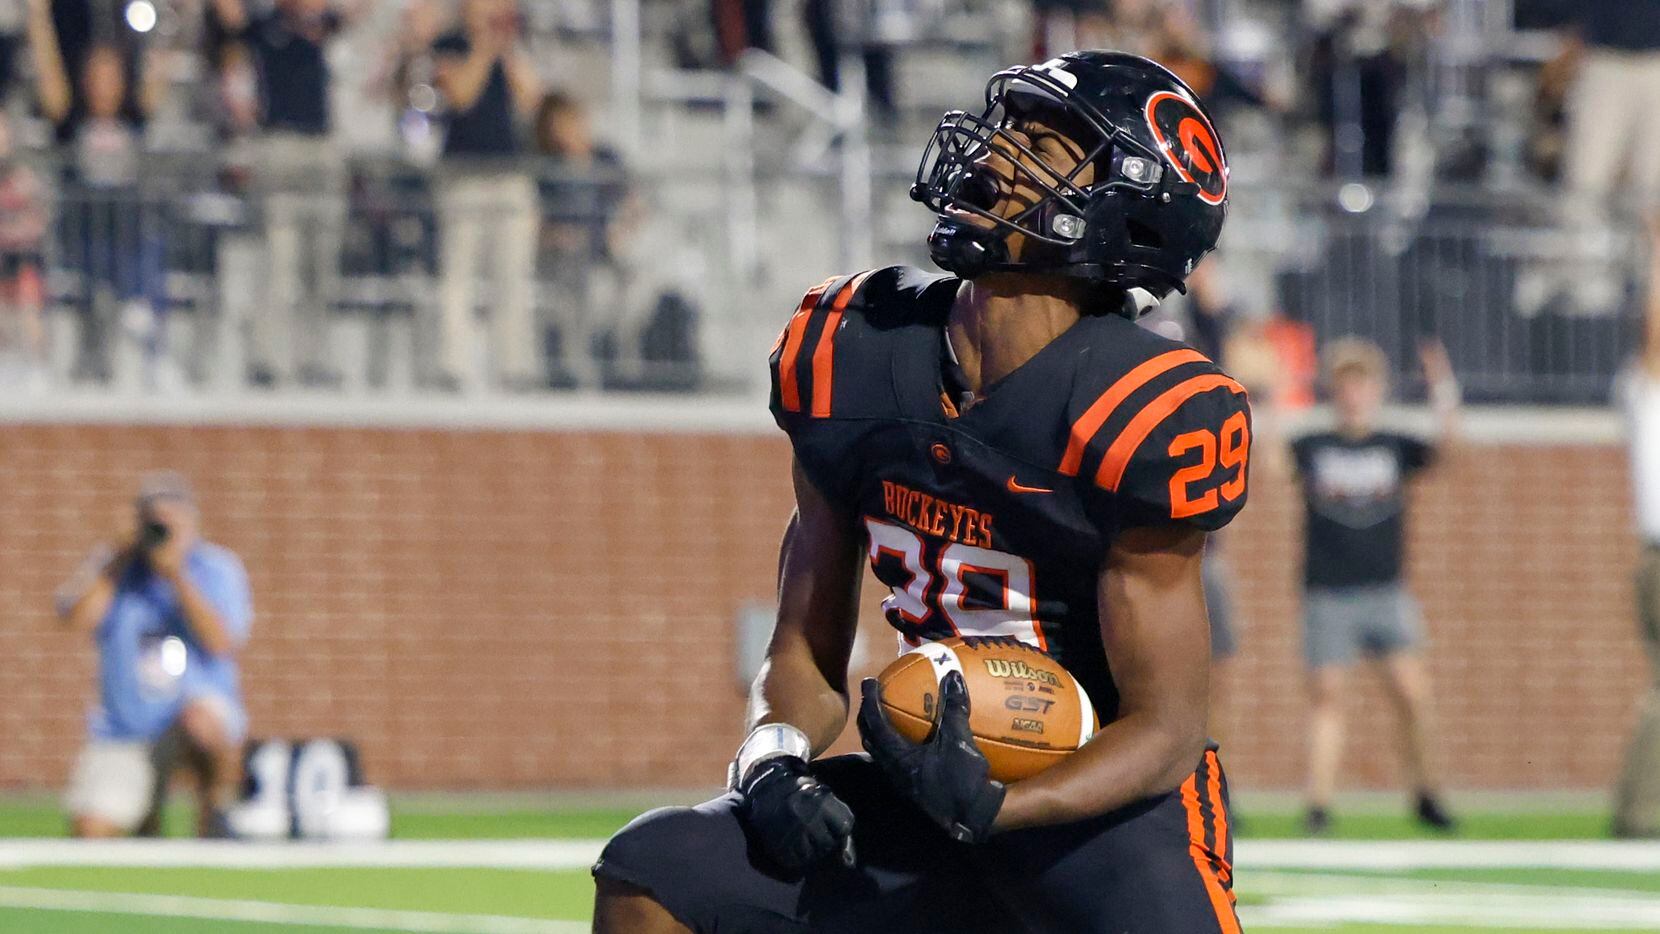 Gilmer running back Ashton Haynes (29) celebrates after scoring a touchdown during the first...